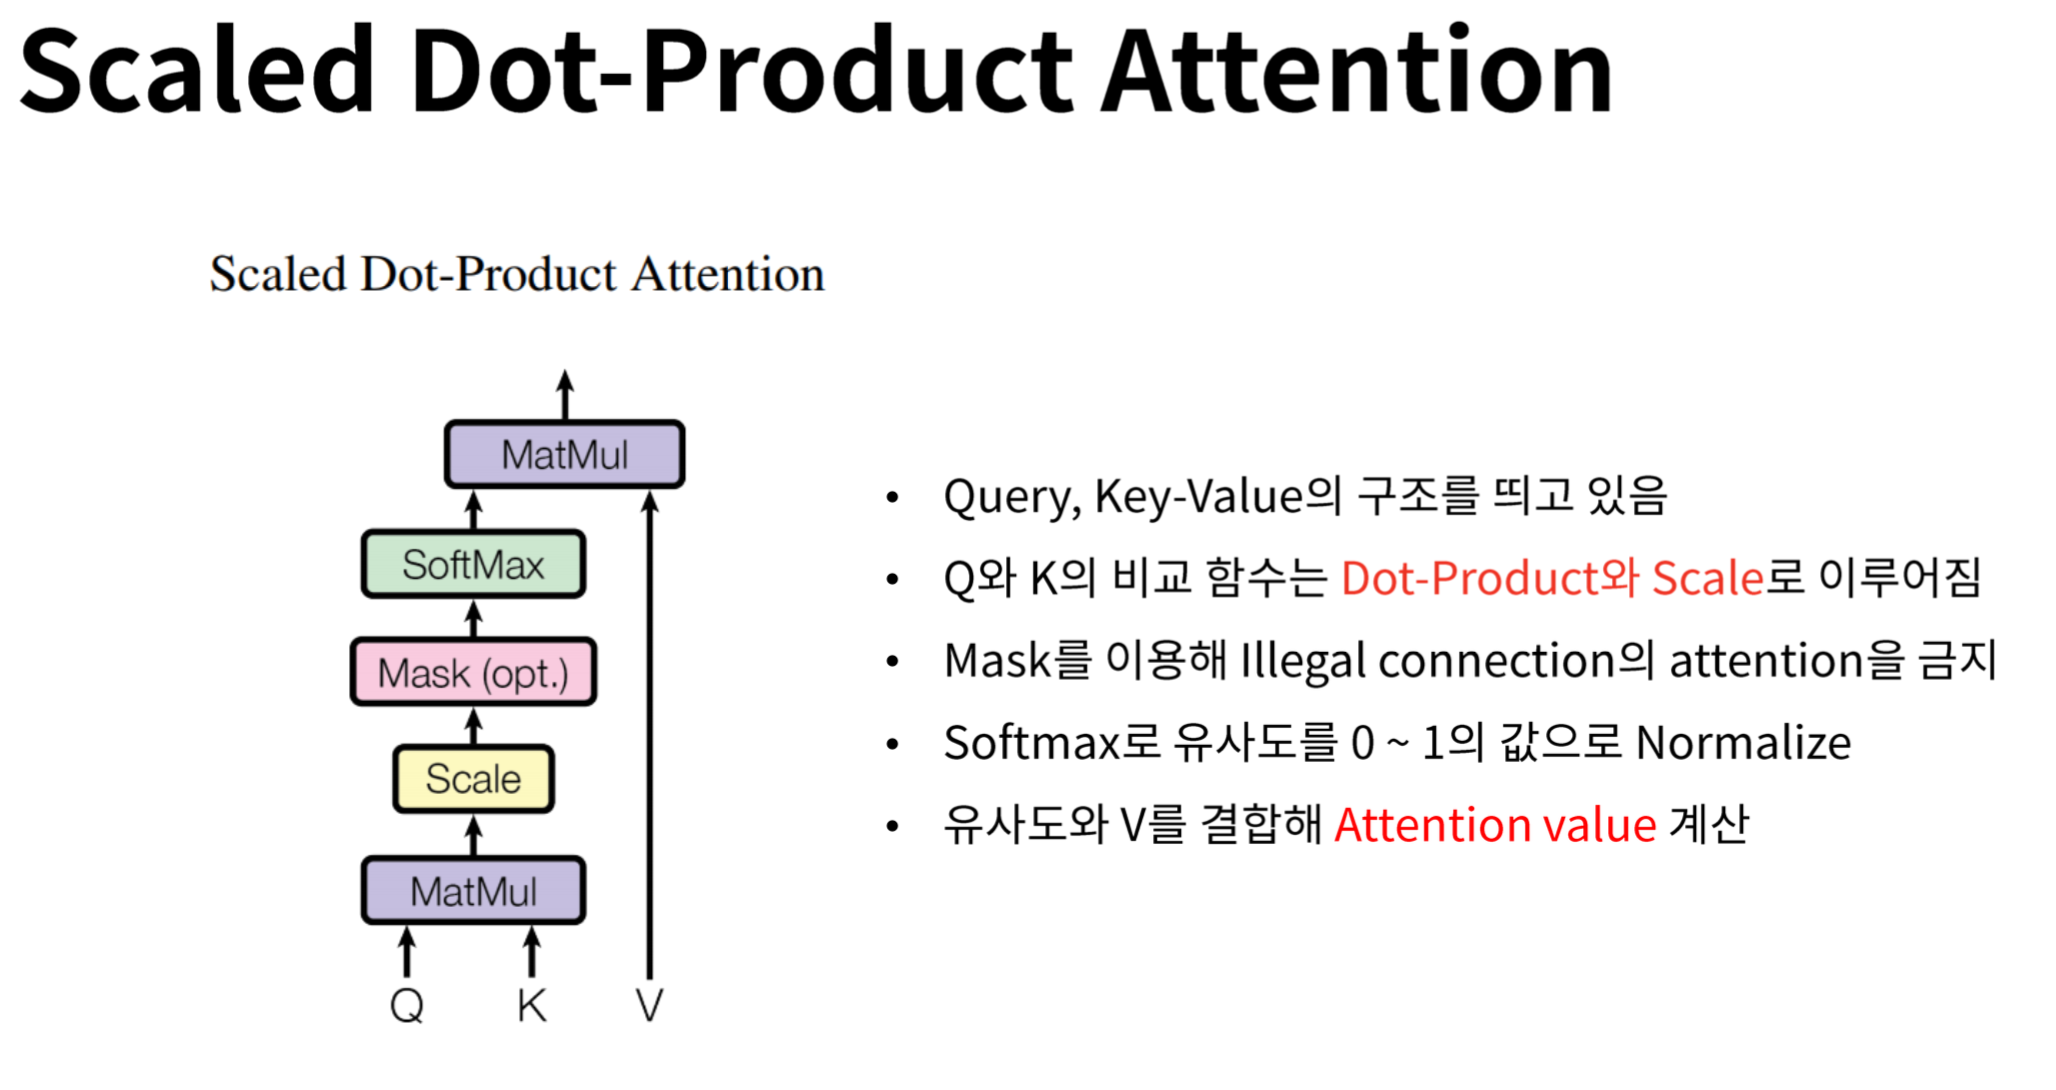 Scaled Dot-Product Attention